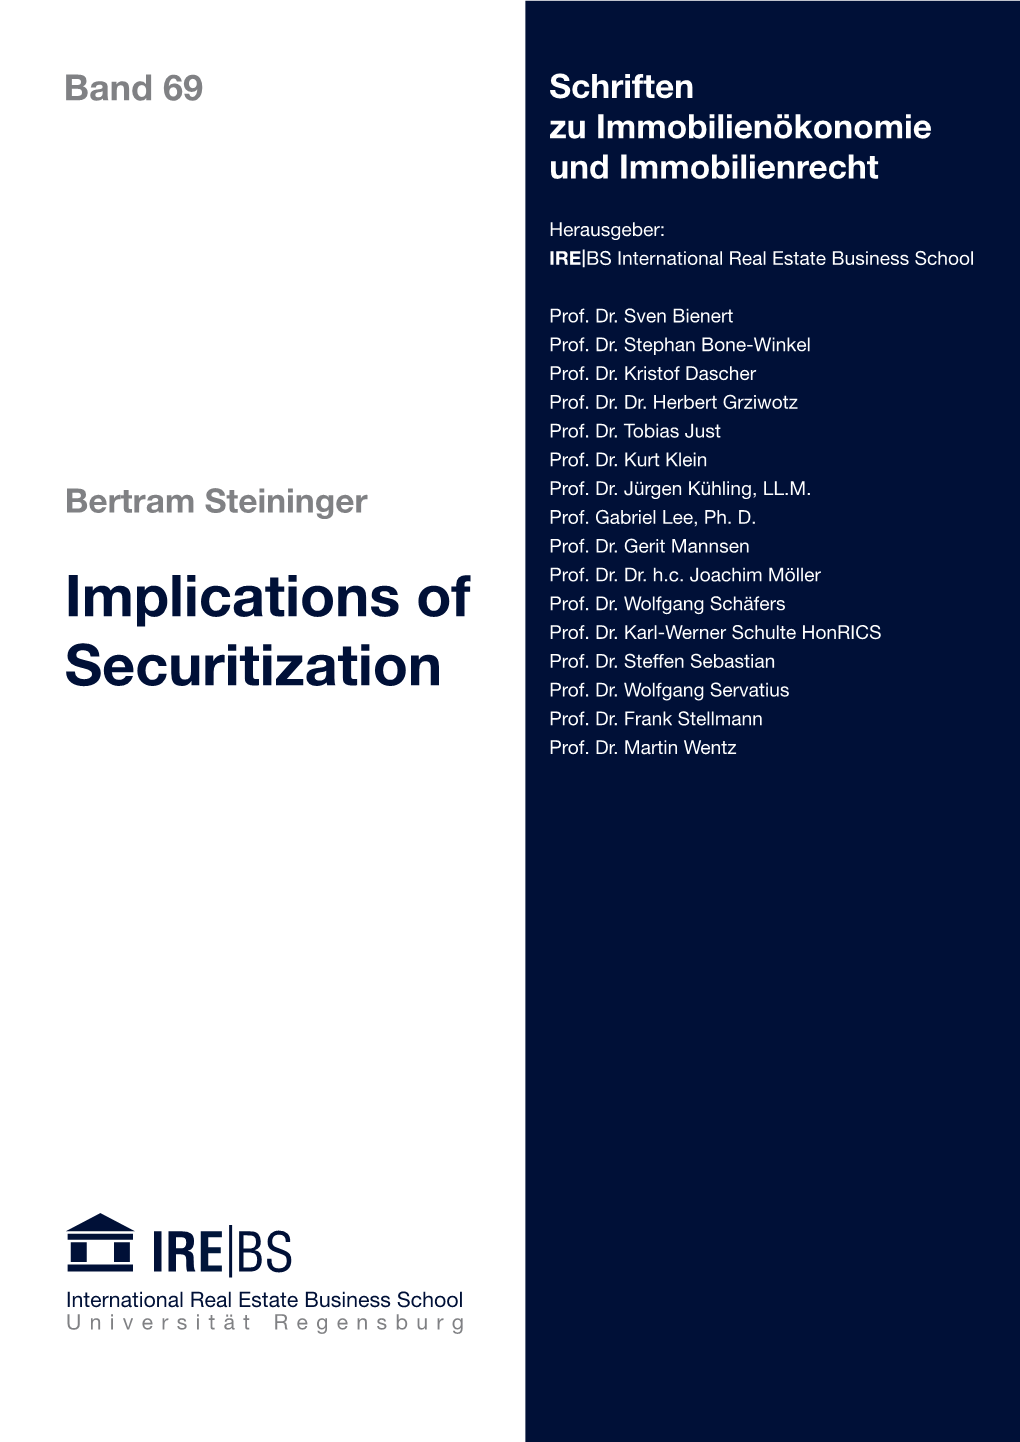 Implications of Securitization